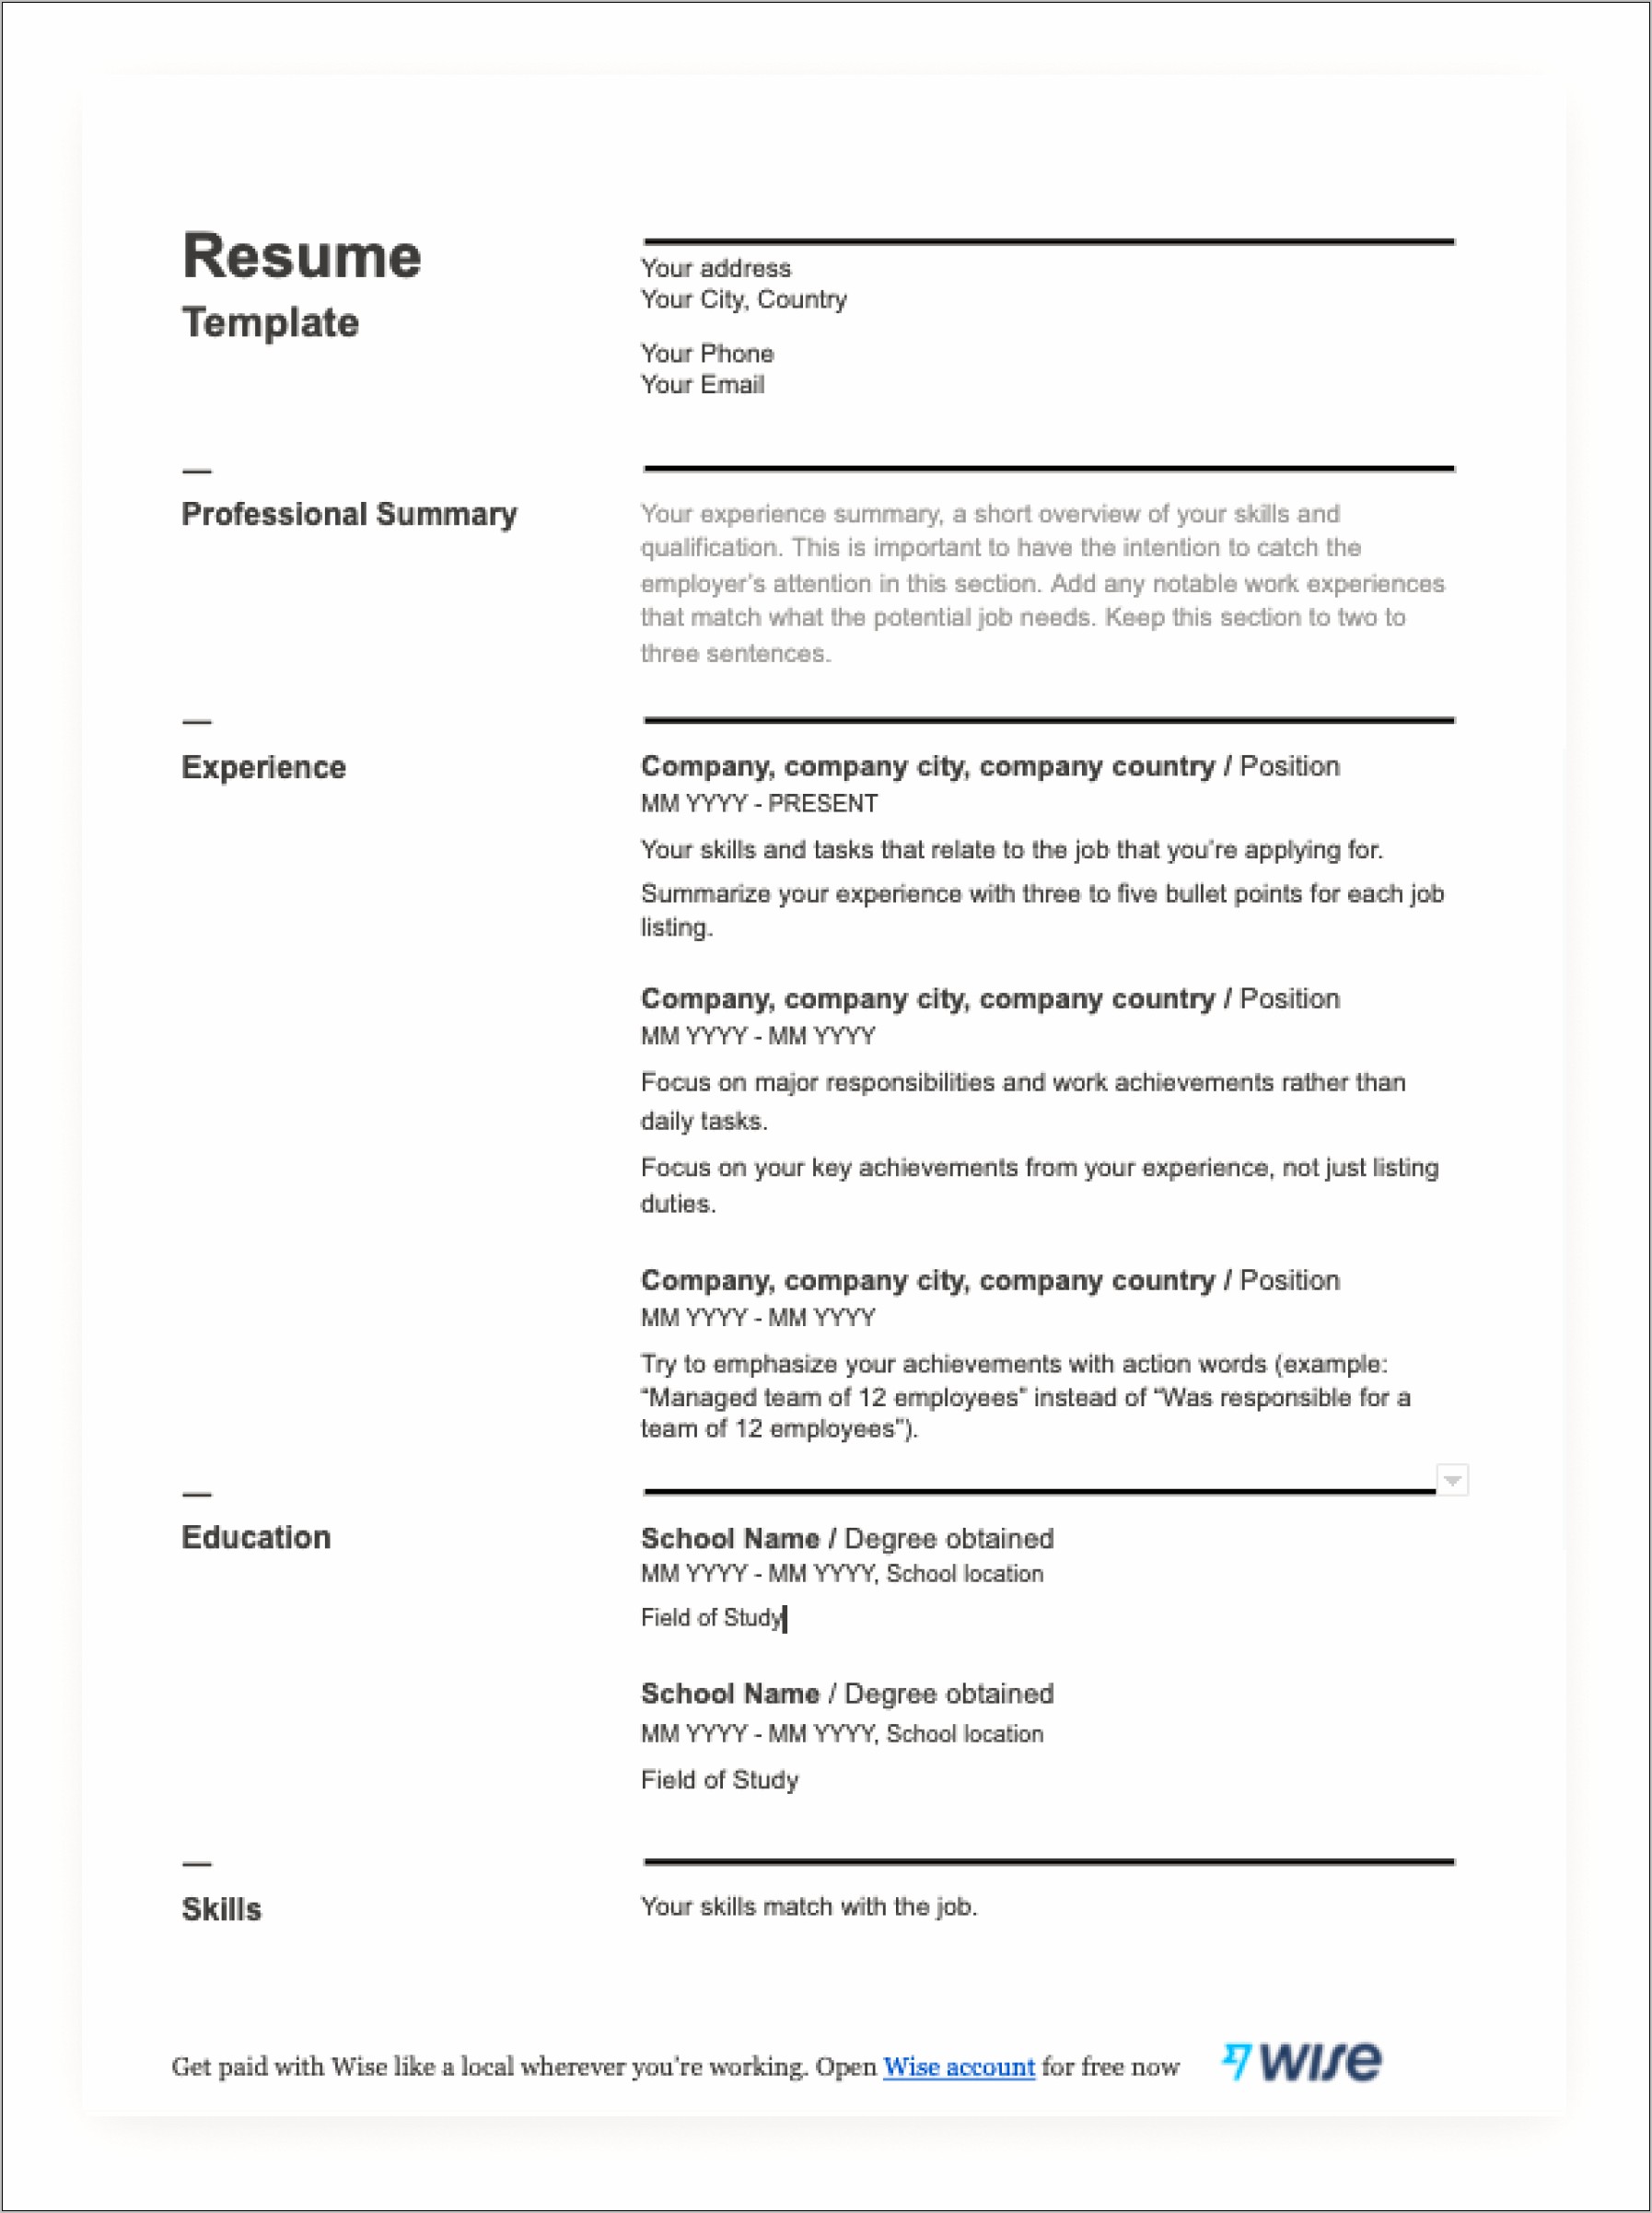 Resume For Teenager Without Work Experience